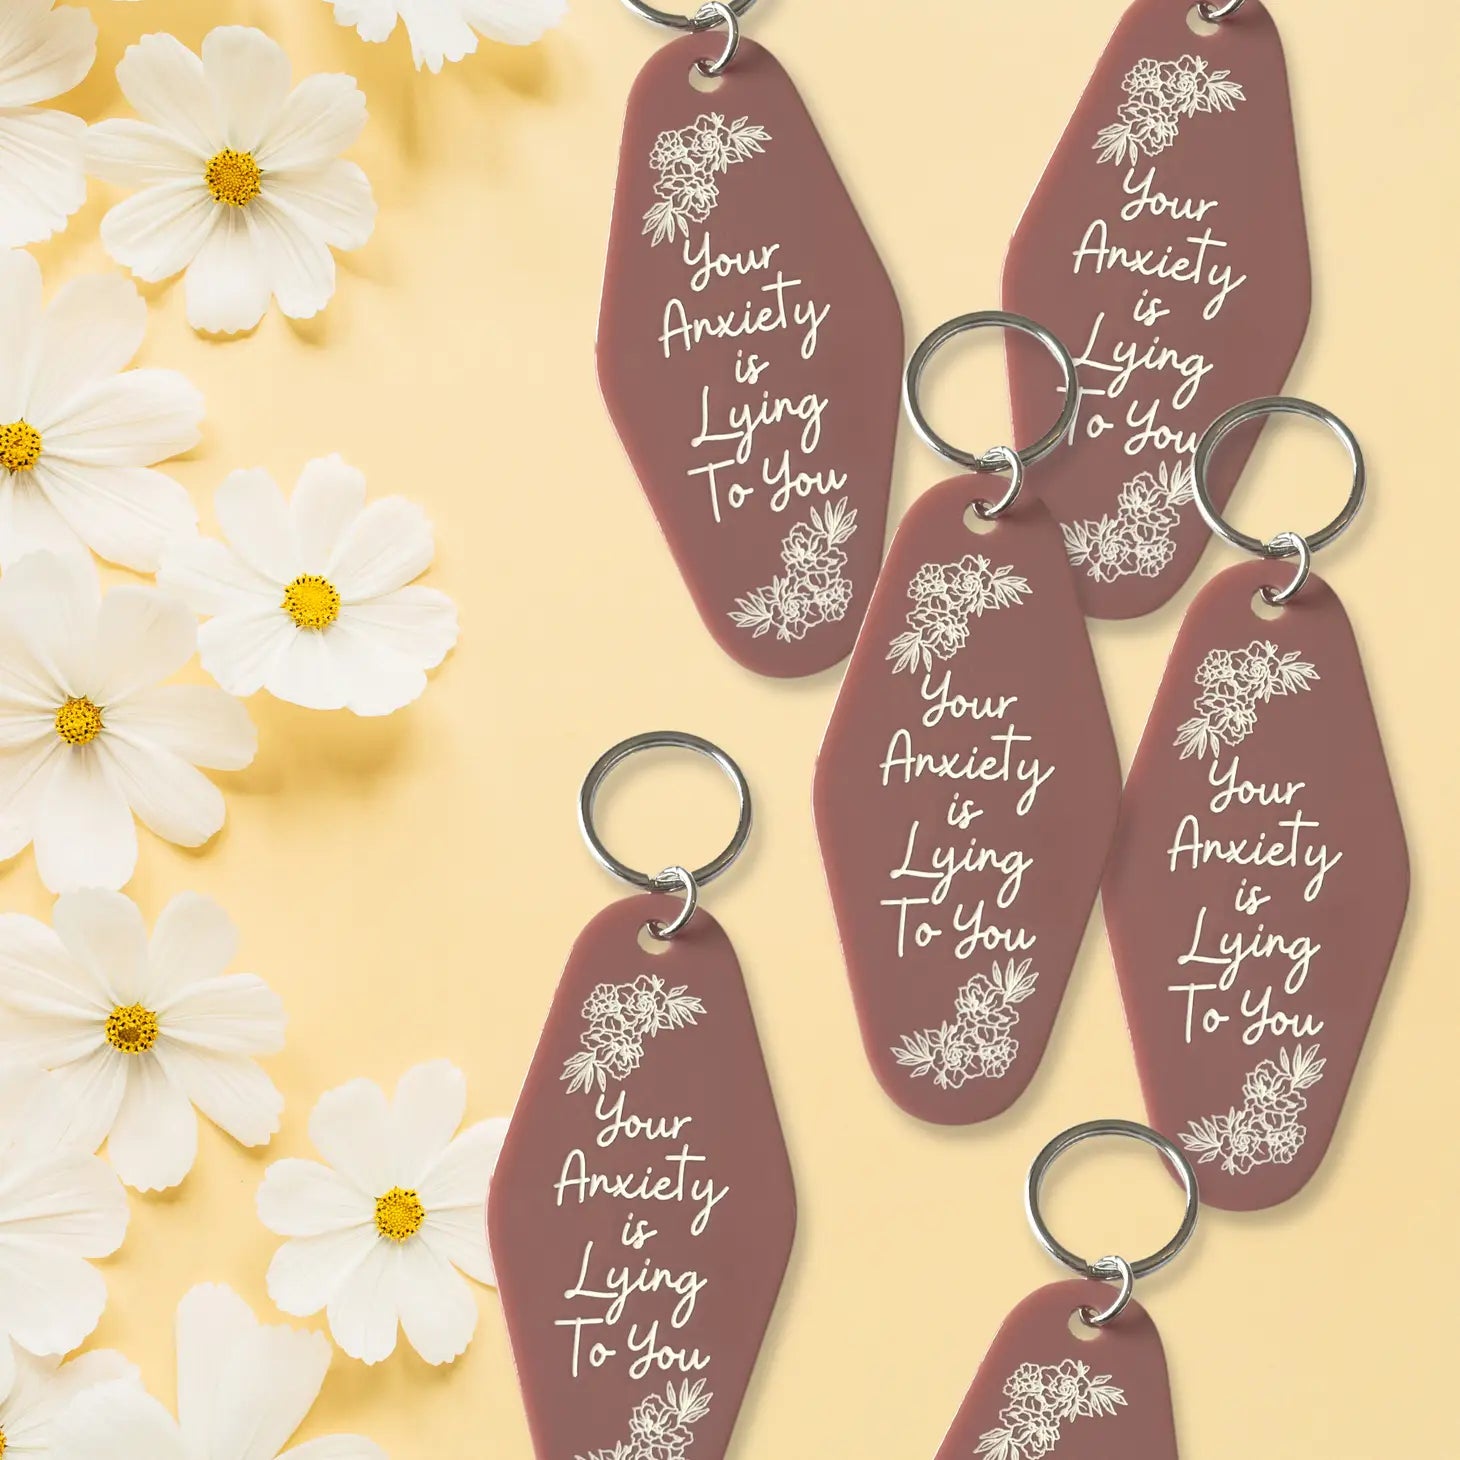 Your anxiety is lying to you Keychain